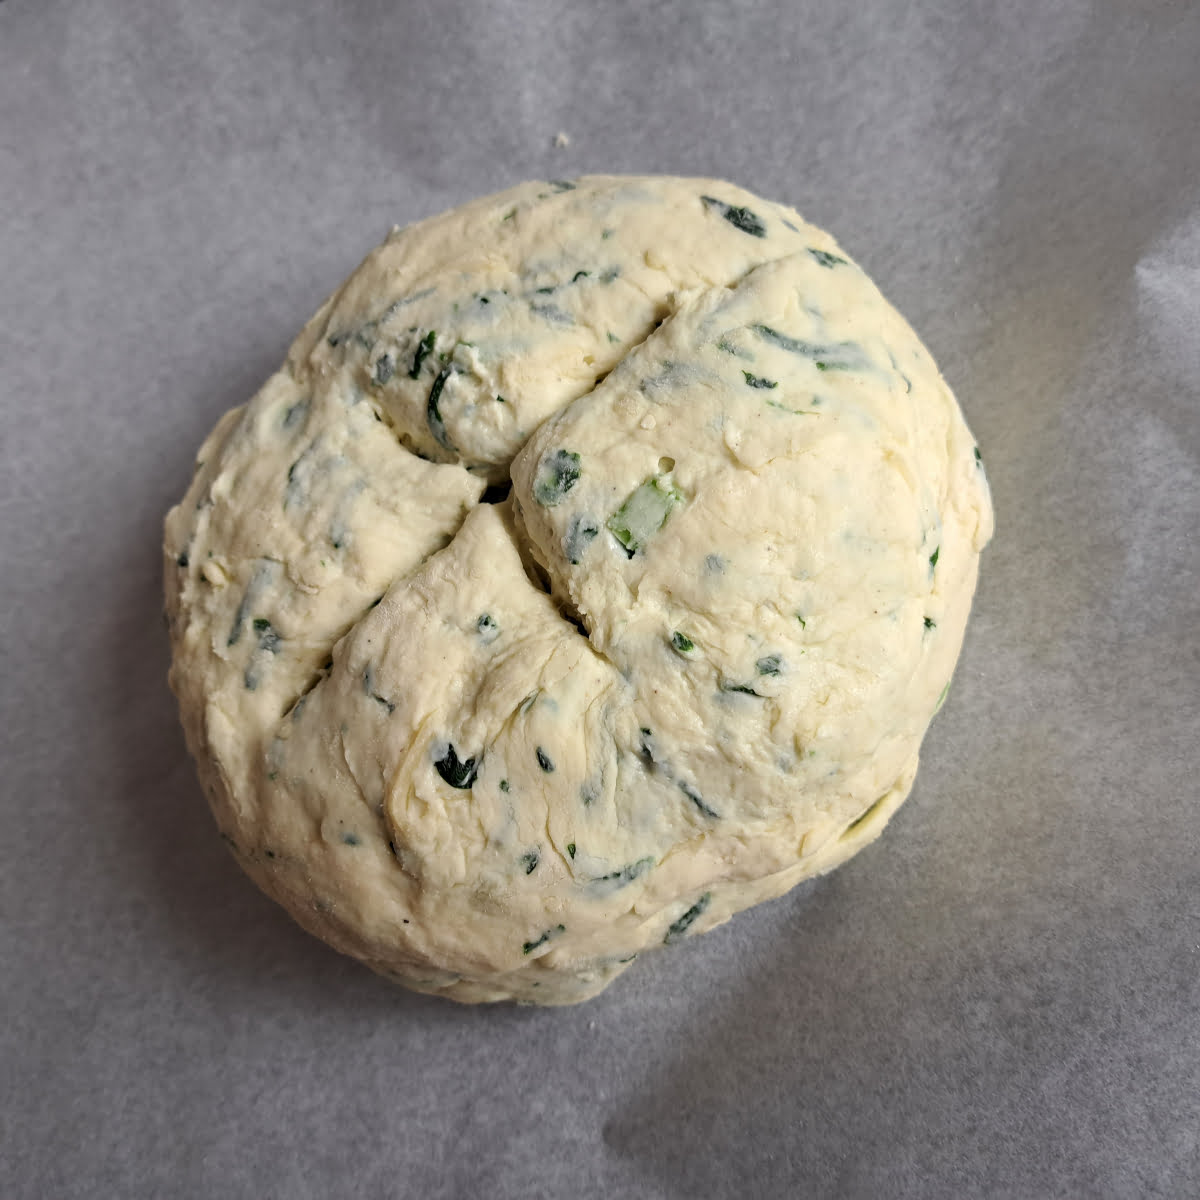 Wild garlic bread dough with a cross on the top of the bread loaf, before baking.